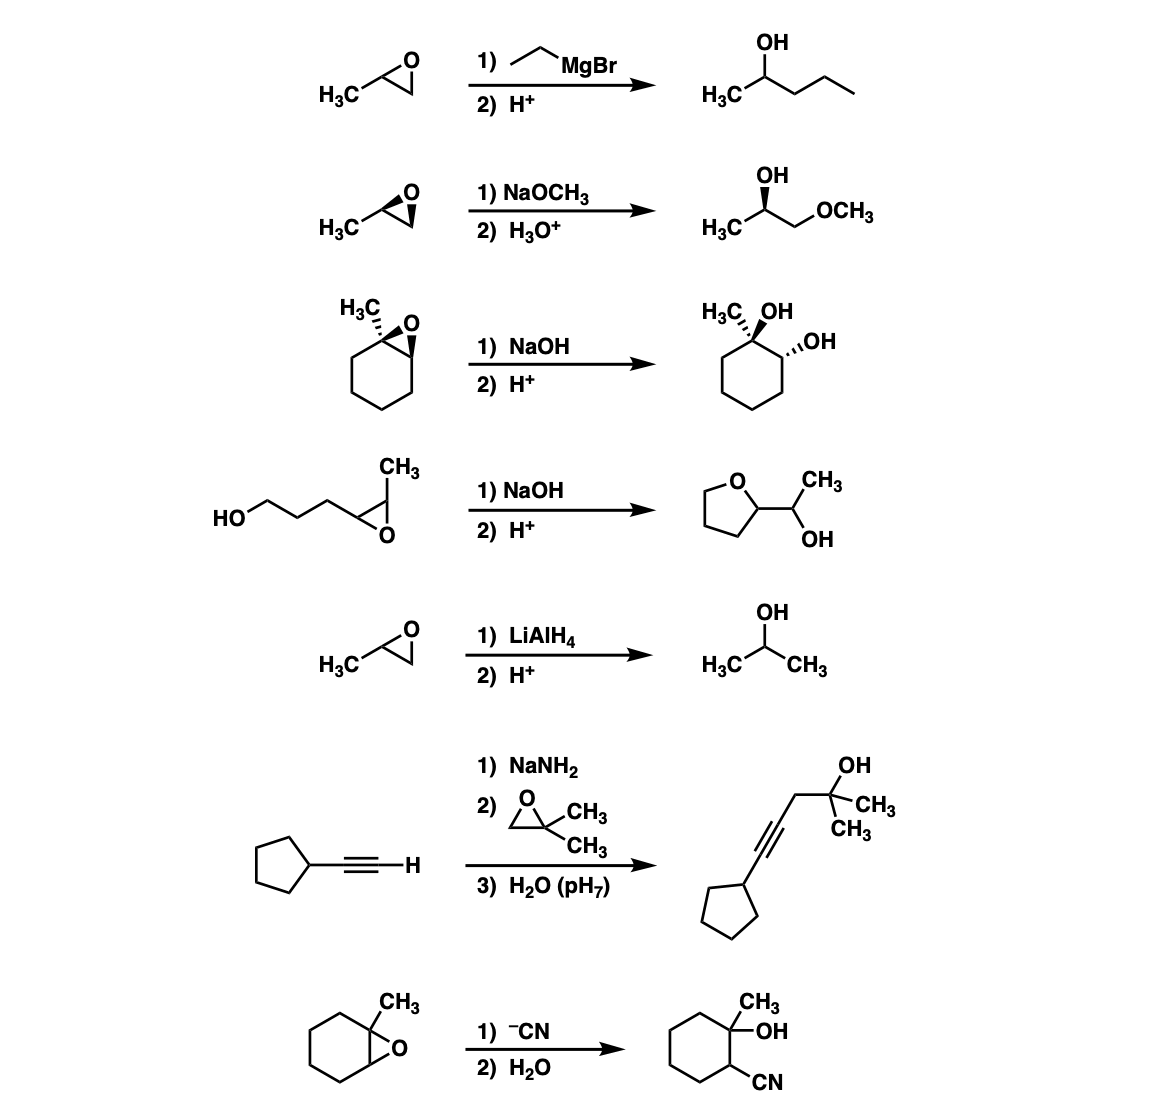 examples of basic opening of epoxides with various nucleophiles